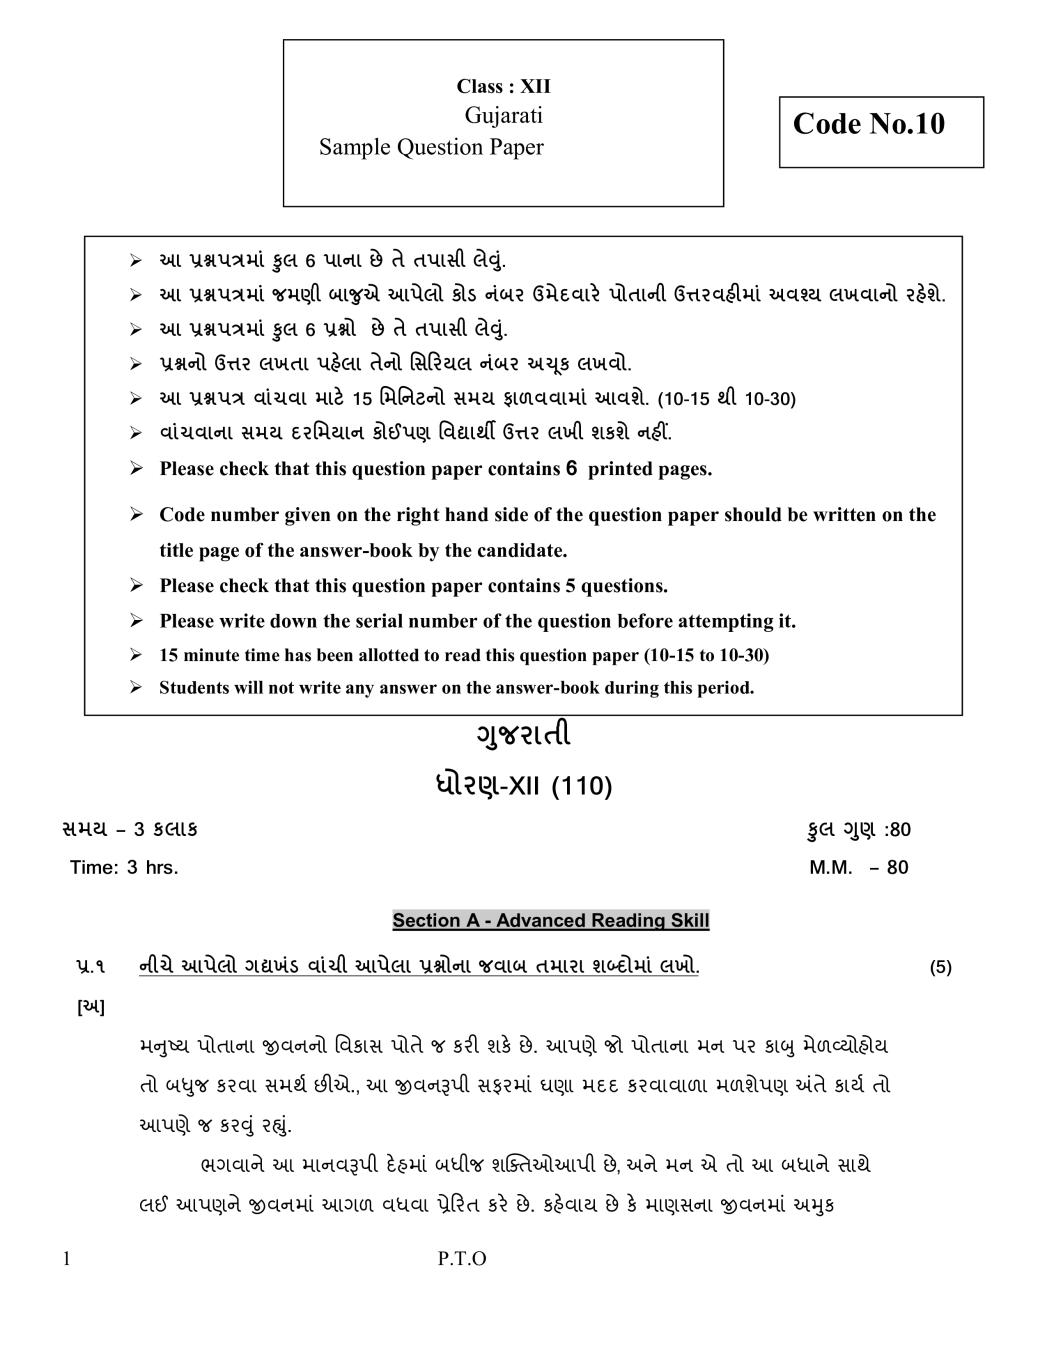 CBSE Class 12 Sample Paper 2020 for Gujarati - Page 1